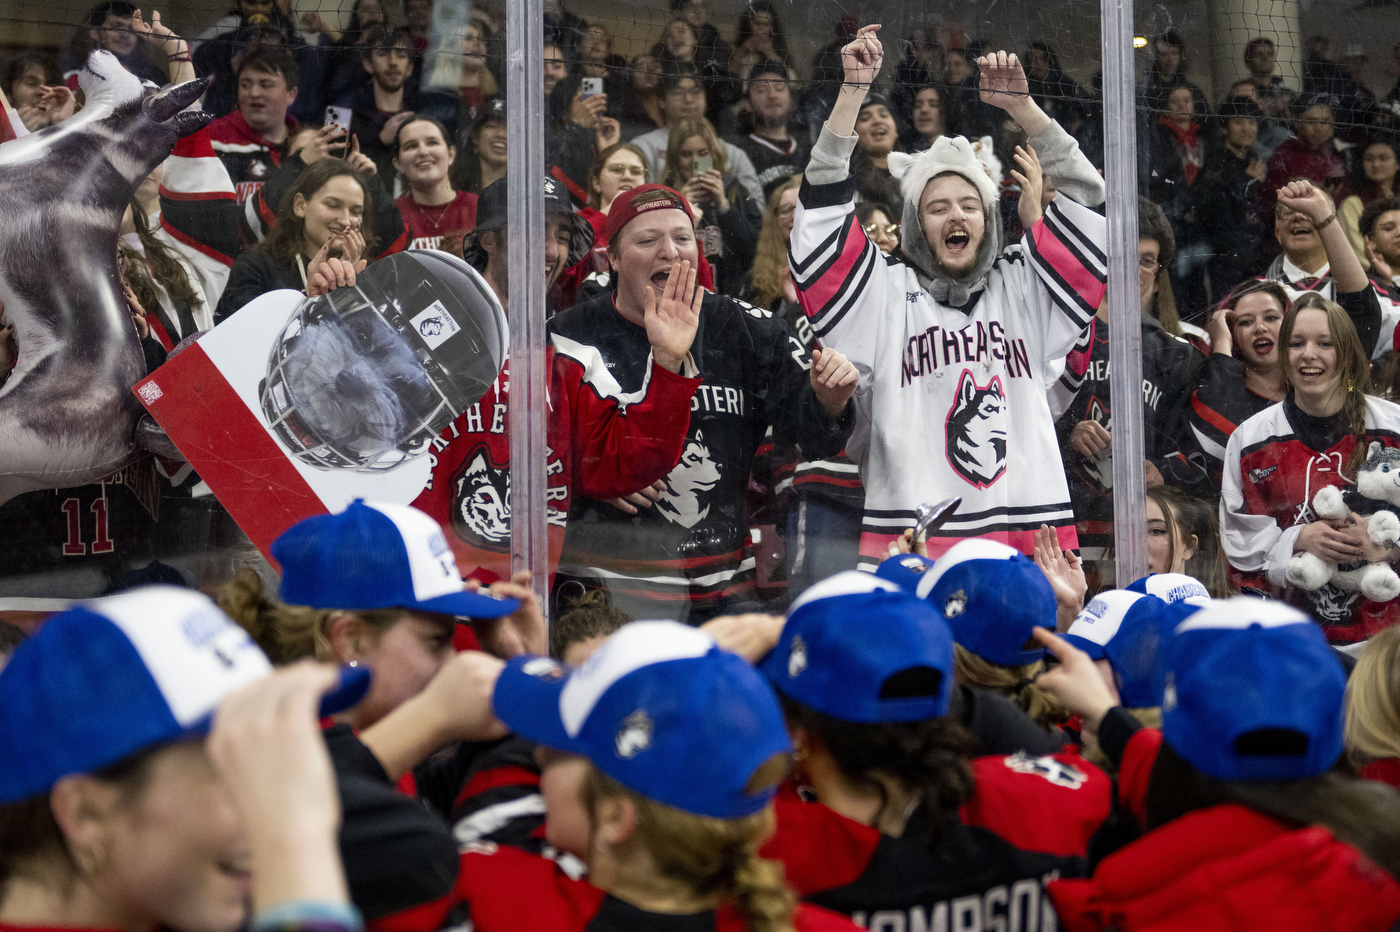 Northeastern University hockey fans celebrate in the stands